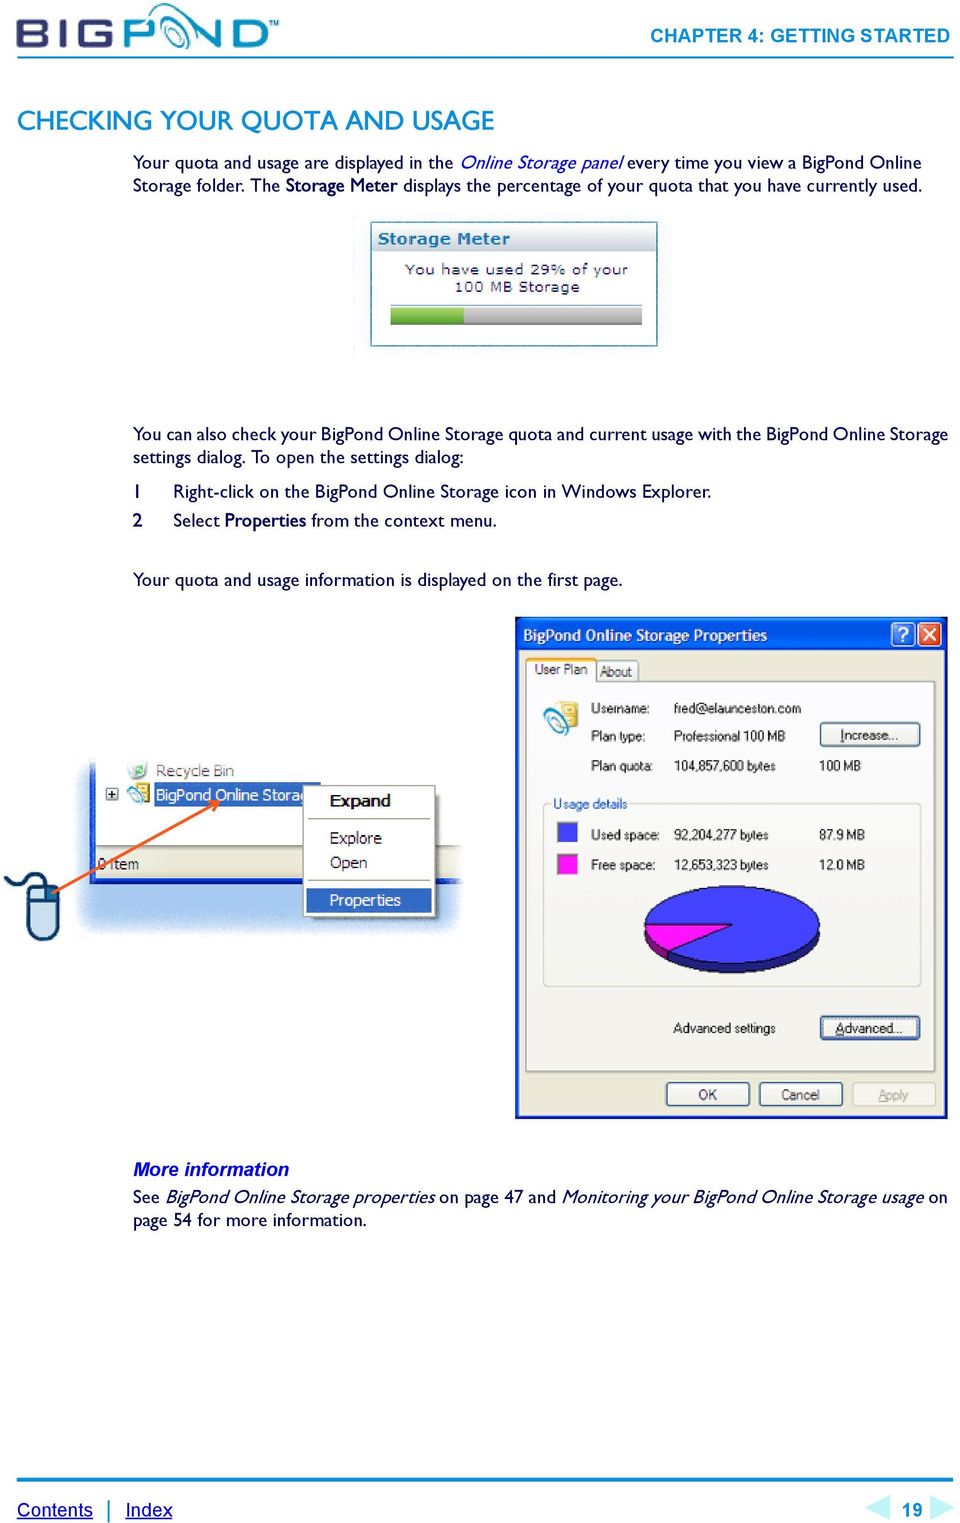 You can also check your BigPond Online Storage quota and current usage with the BigPond Online Storage settings dialog.